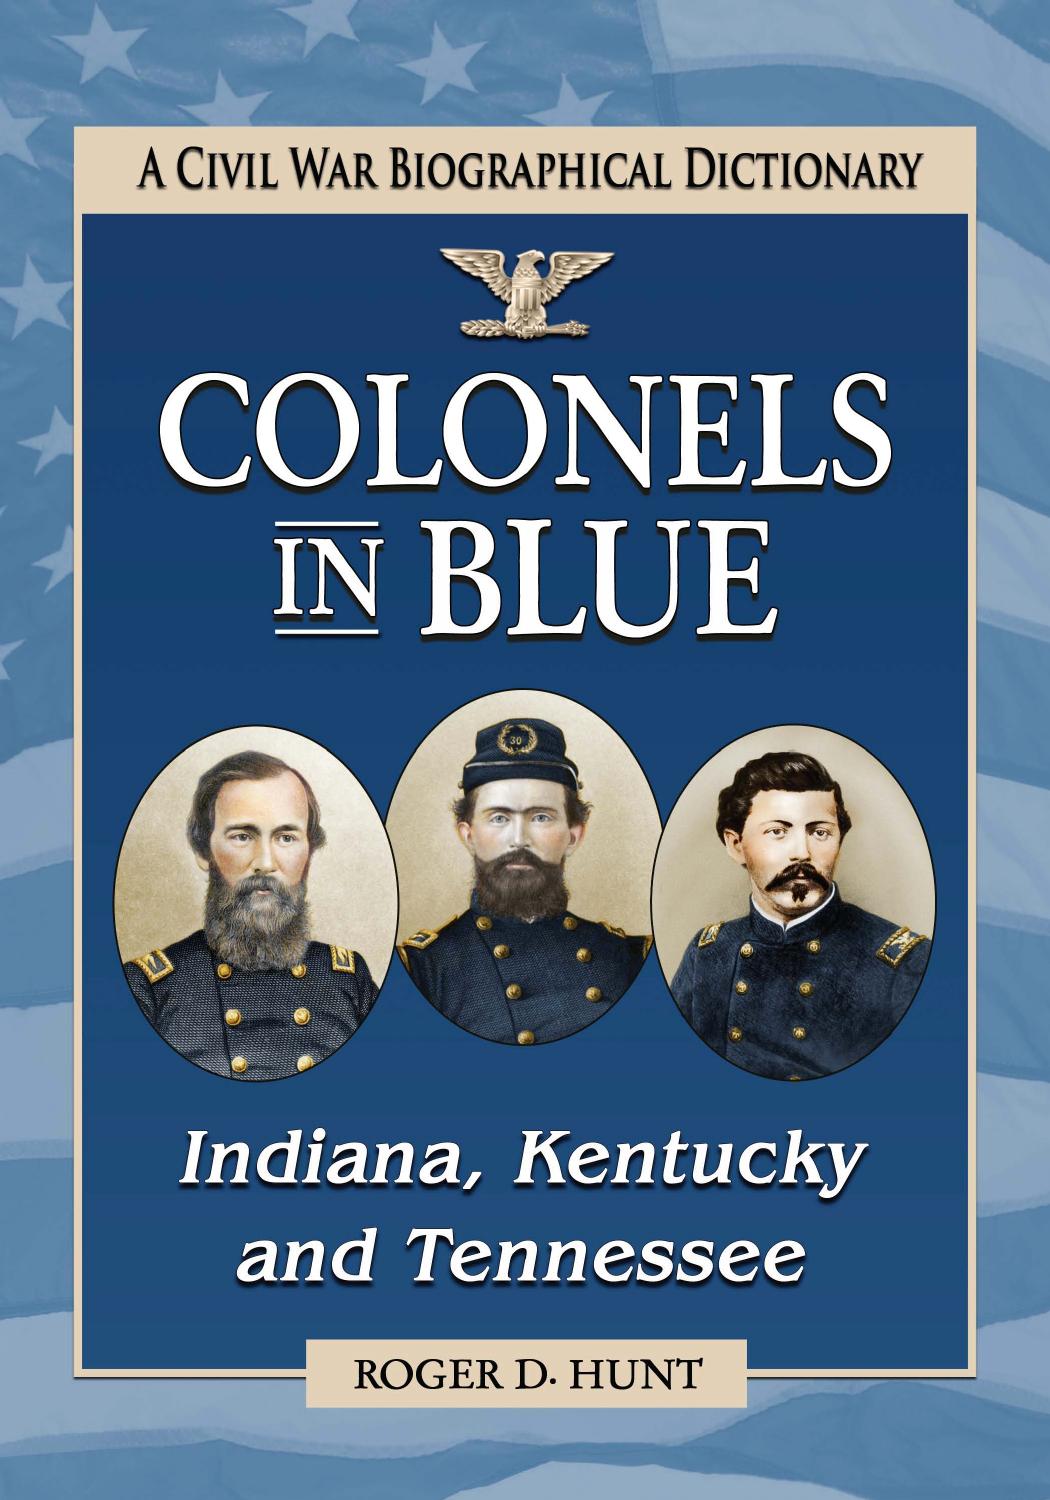 Colonels in Blue--Indiana, Kentucky and Tennessee: A Civil War Biographical Dictionary by Roger D. Hunt